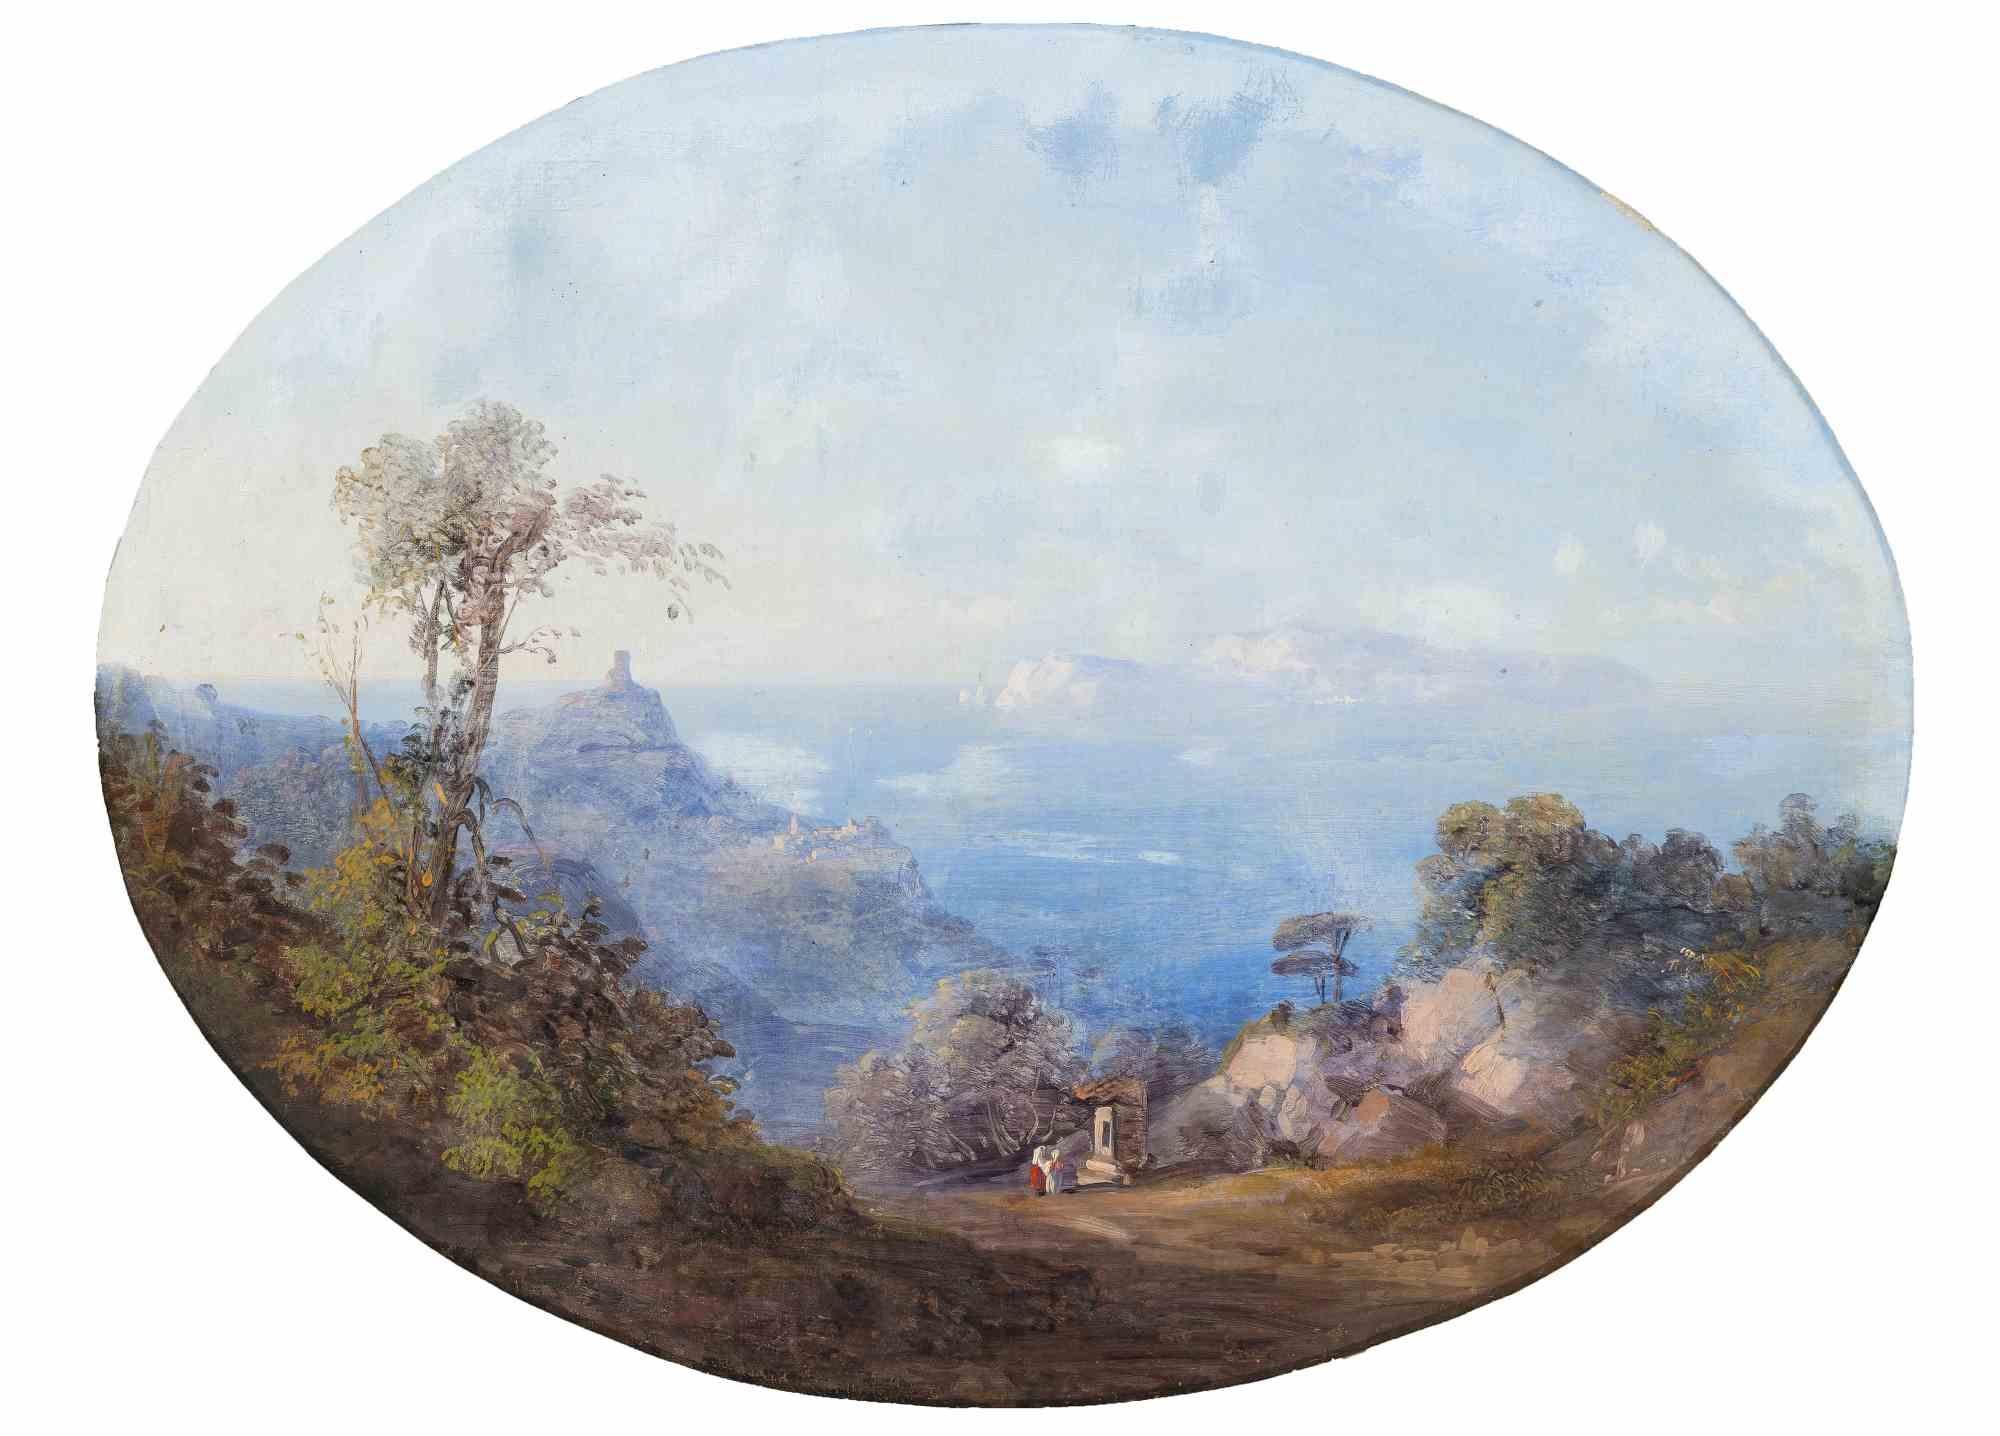 Pair of Landscapes with Views of Ancient Rome - Oil on Canvas - Mid 19th century - Painting by Unknown